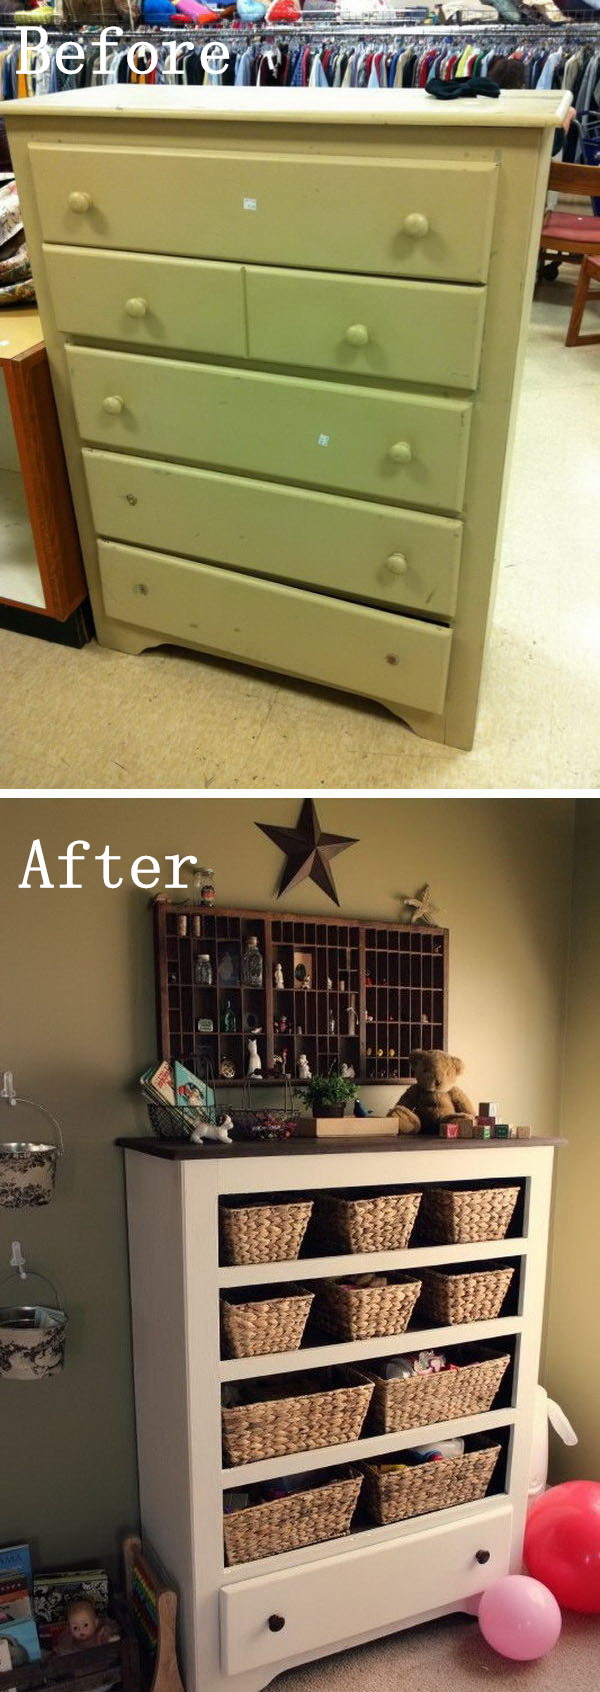 Best of Before & After Furniture Makeovers: Creative DIY Ways to Repurpose Your Old Furniture - Listing More - Best of Before & After Furniture Makeovers: Creative DIY Ways to Repurpose Your Old Furniture - Listing More -   22 diy Furniture repurpose ideas